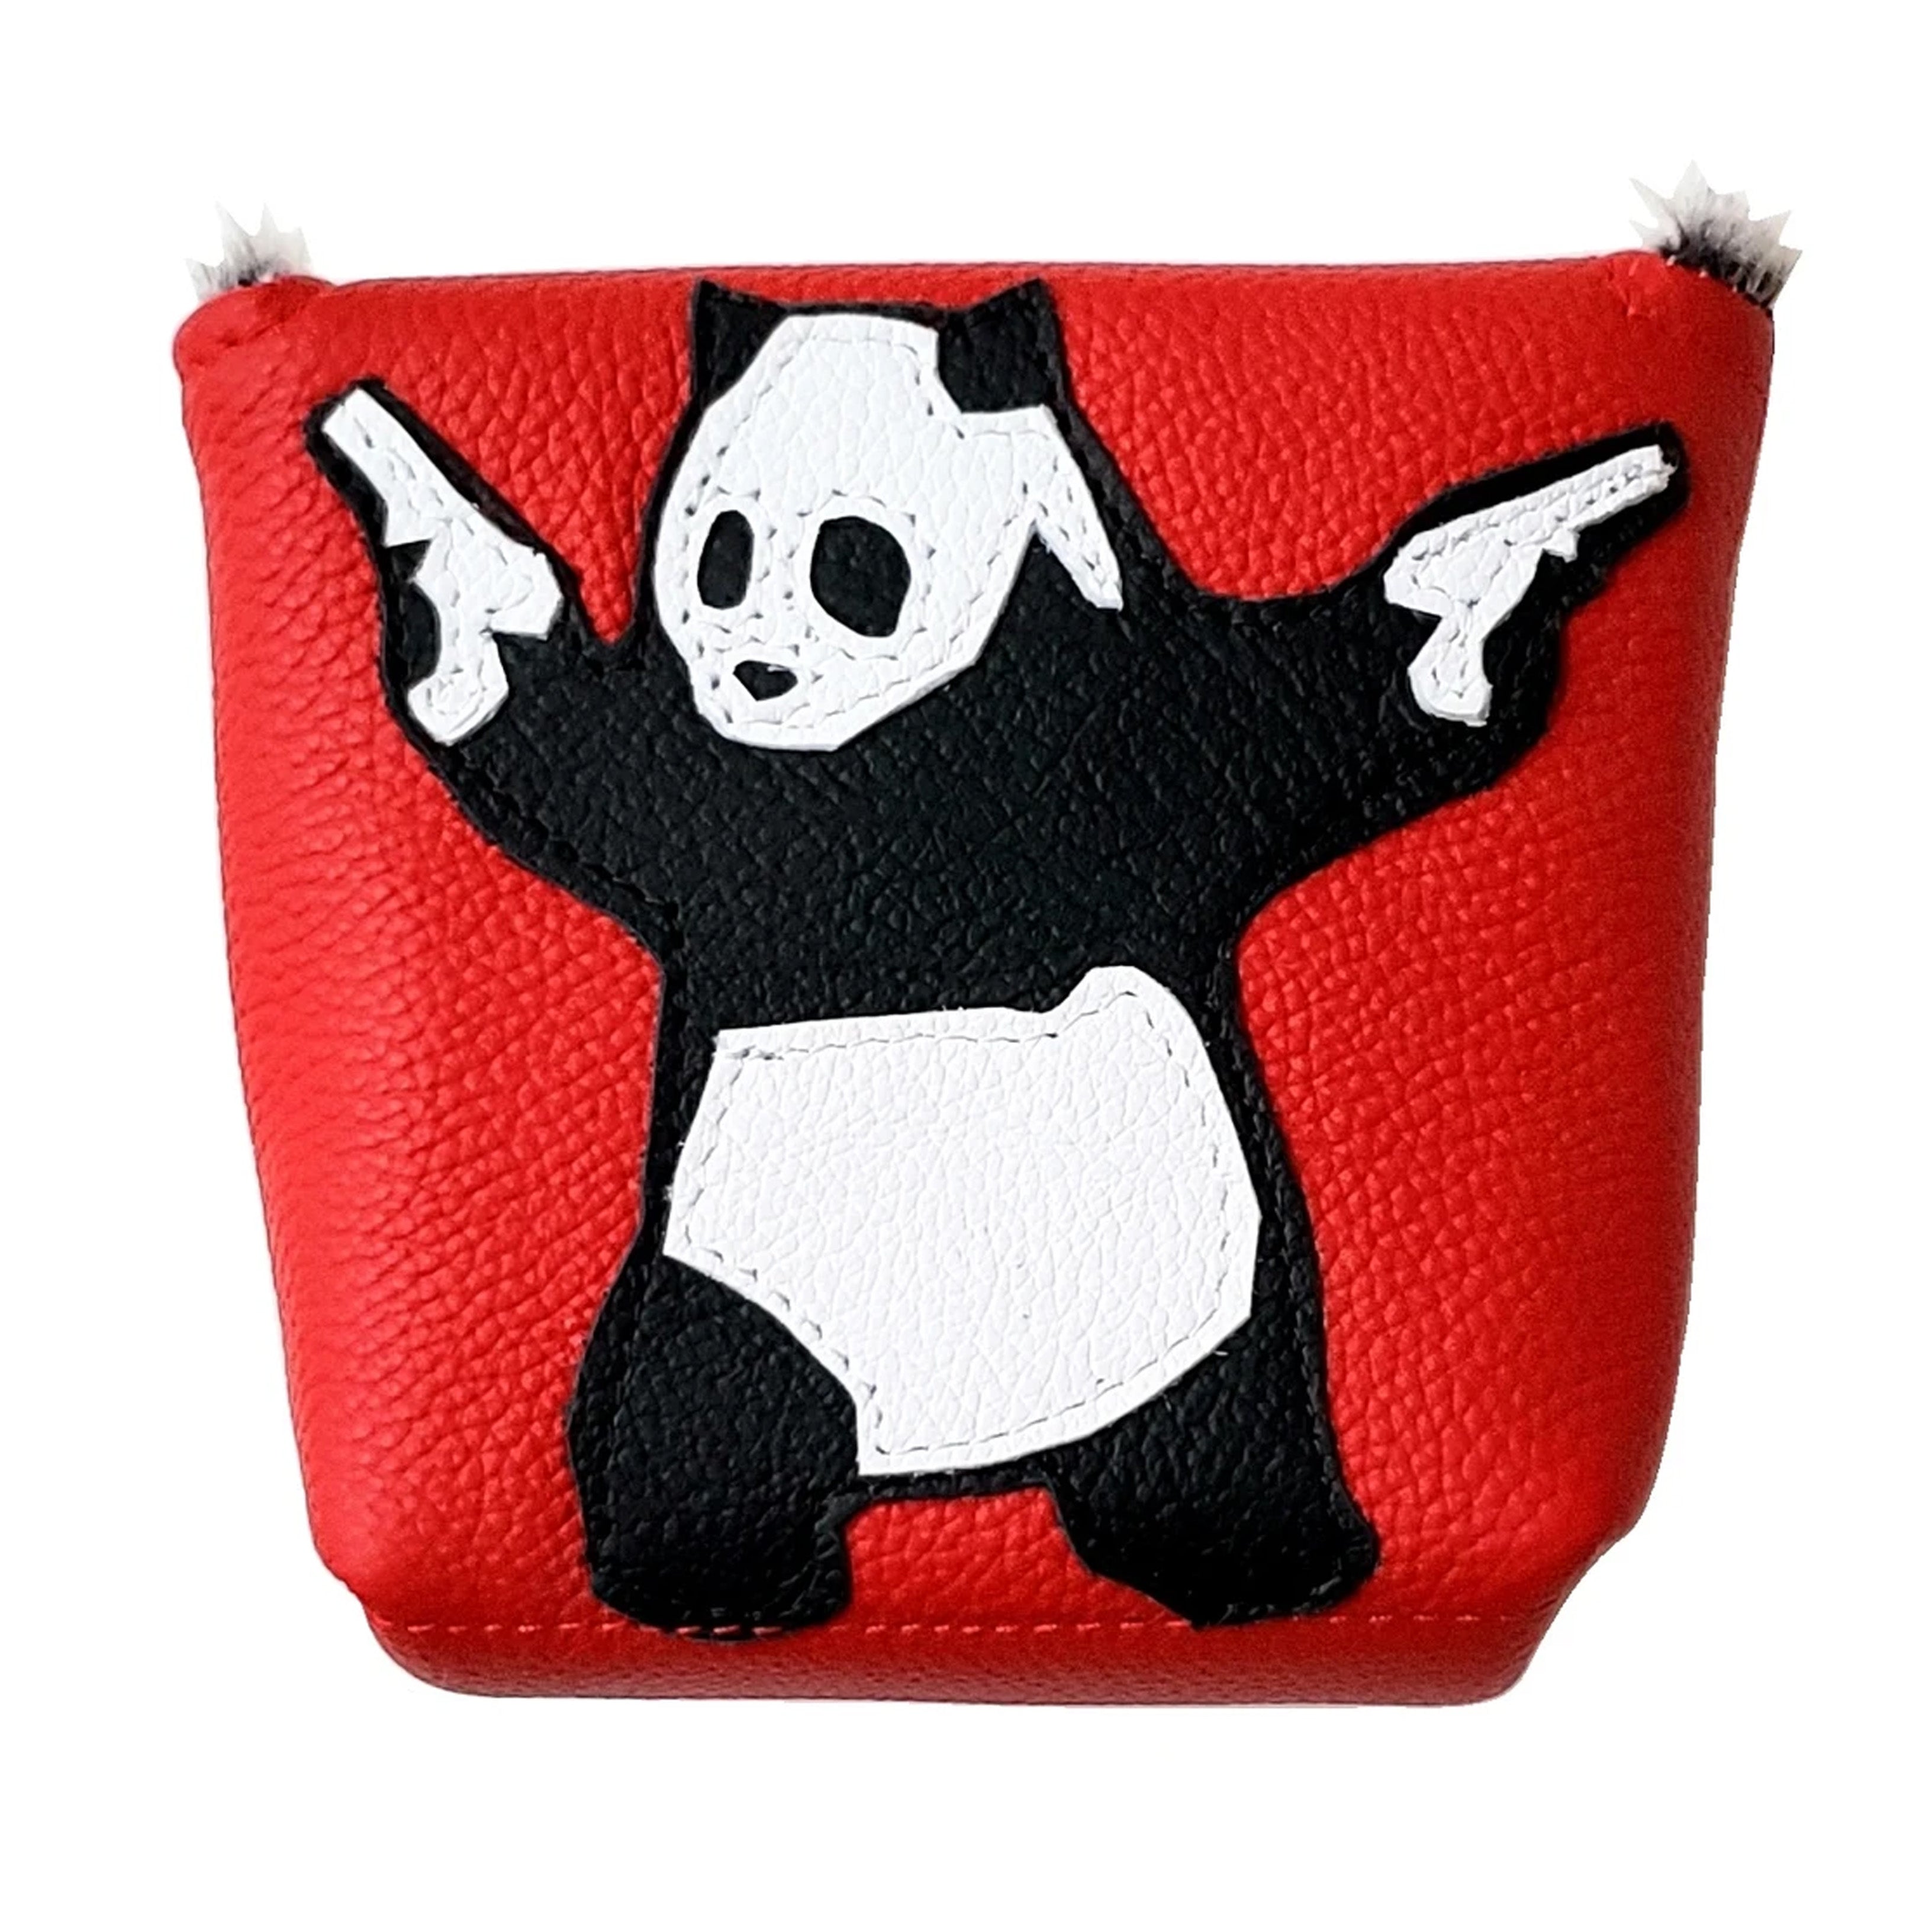 Back In Stock! The Panda With Guns Mallet Putter Cover - Robert Mark Golf